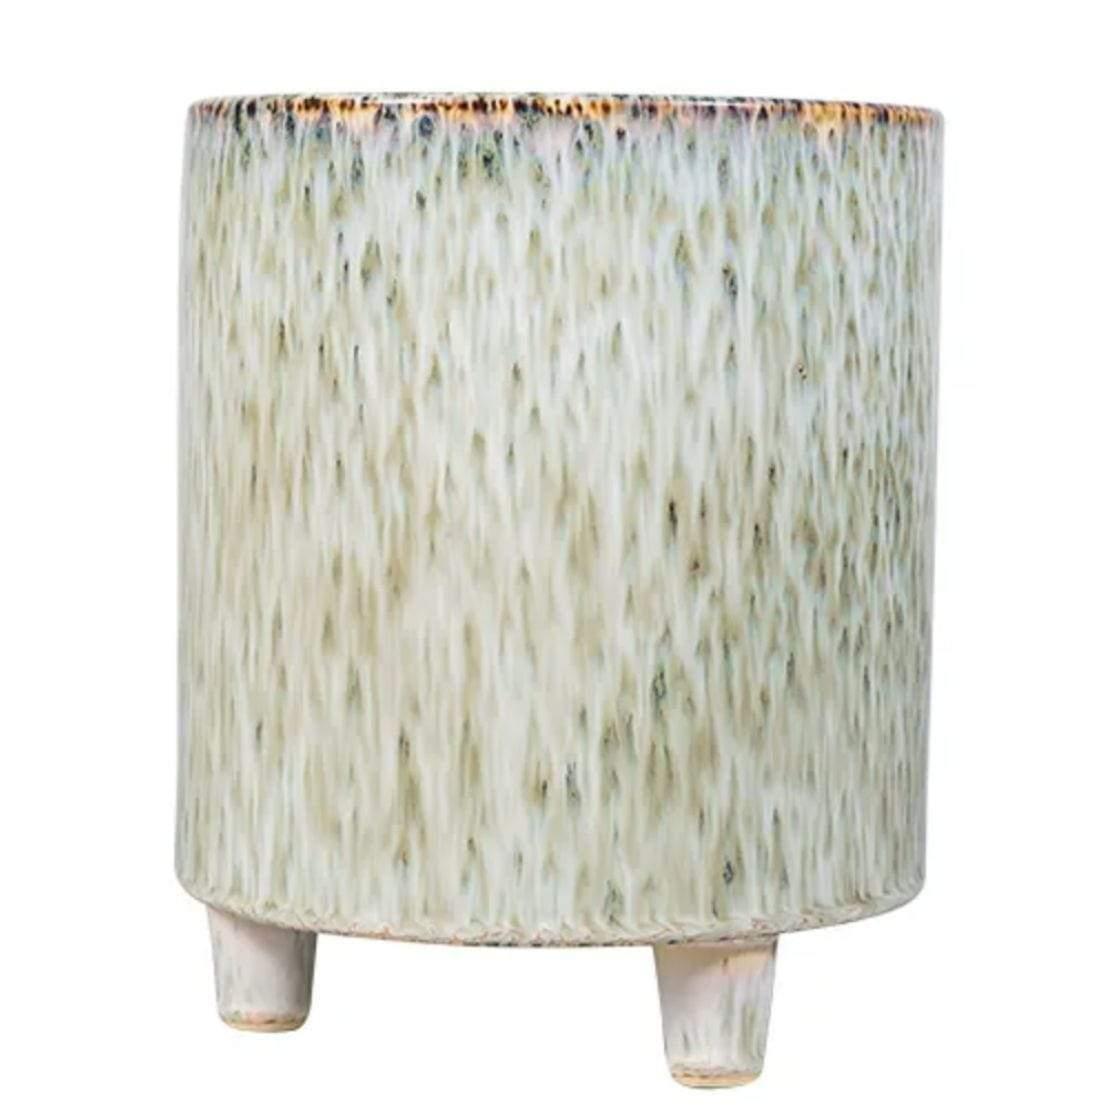 Paloma Planter - Tall House of Dudley